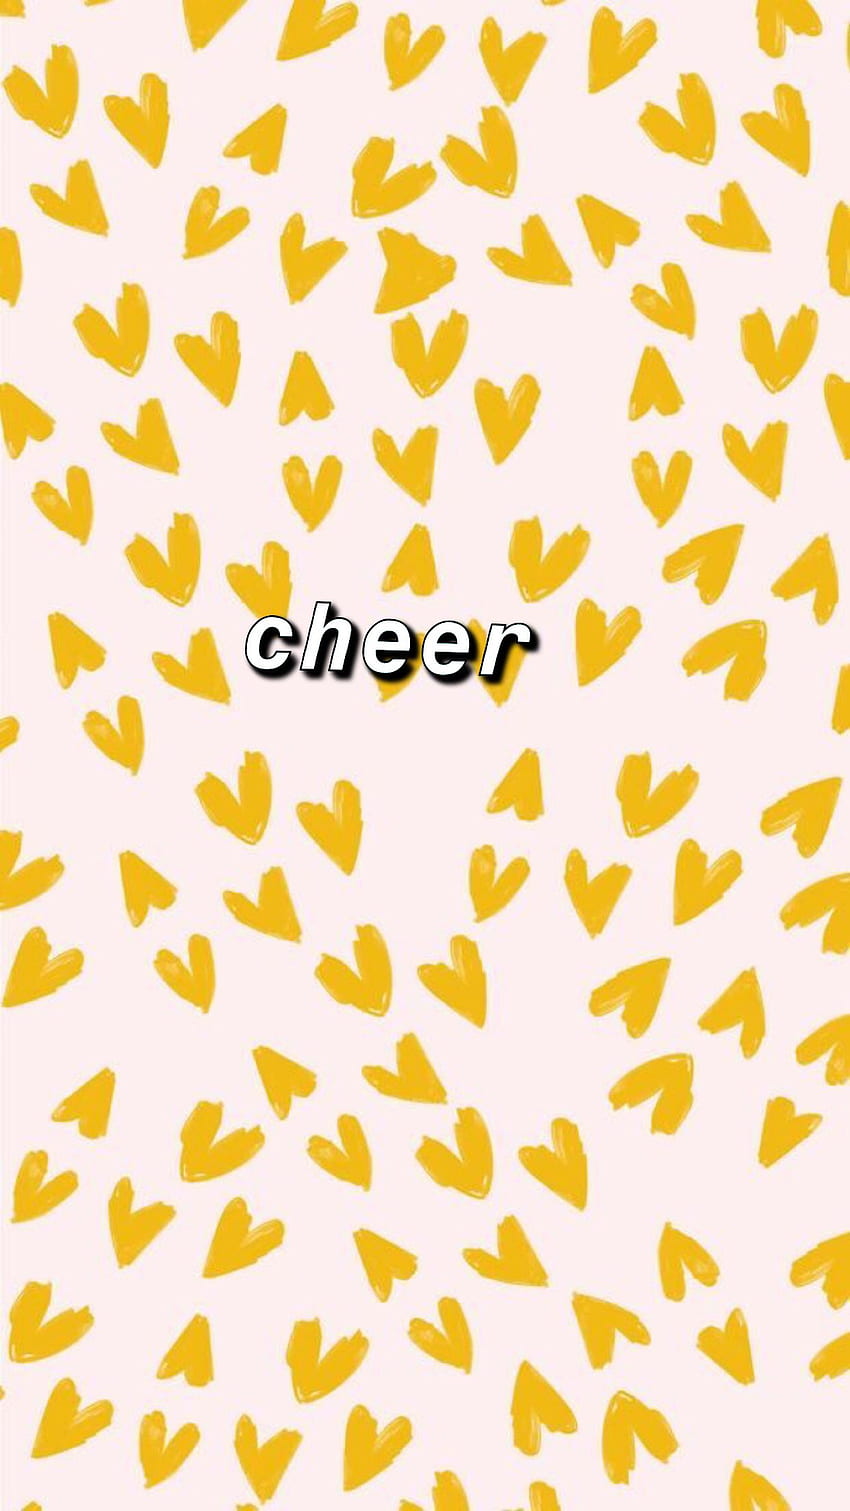 1366x768px, 720P Free download | Cheer Background, Cheer Aesthetic HD ...